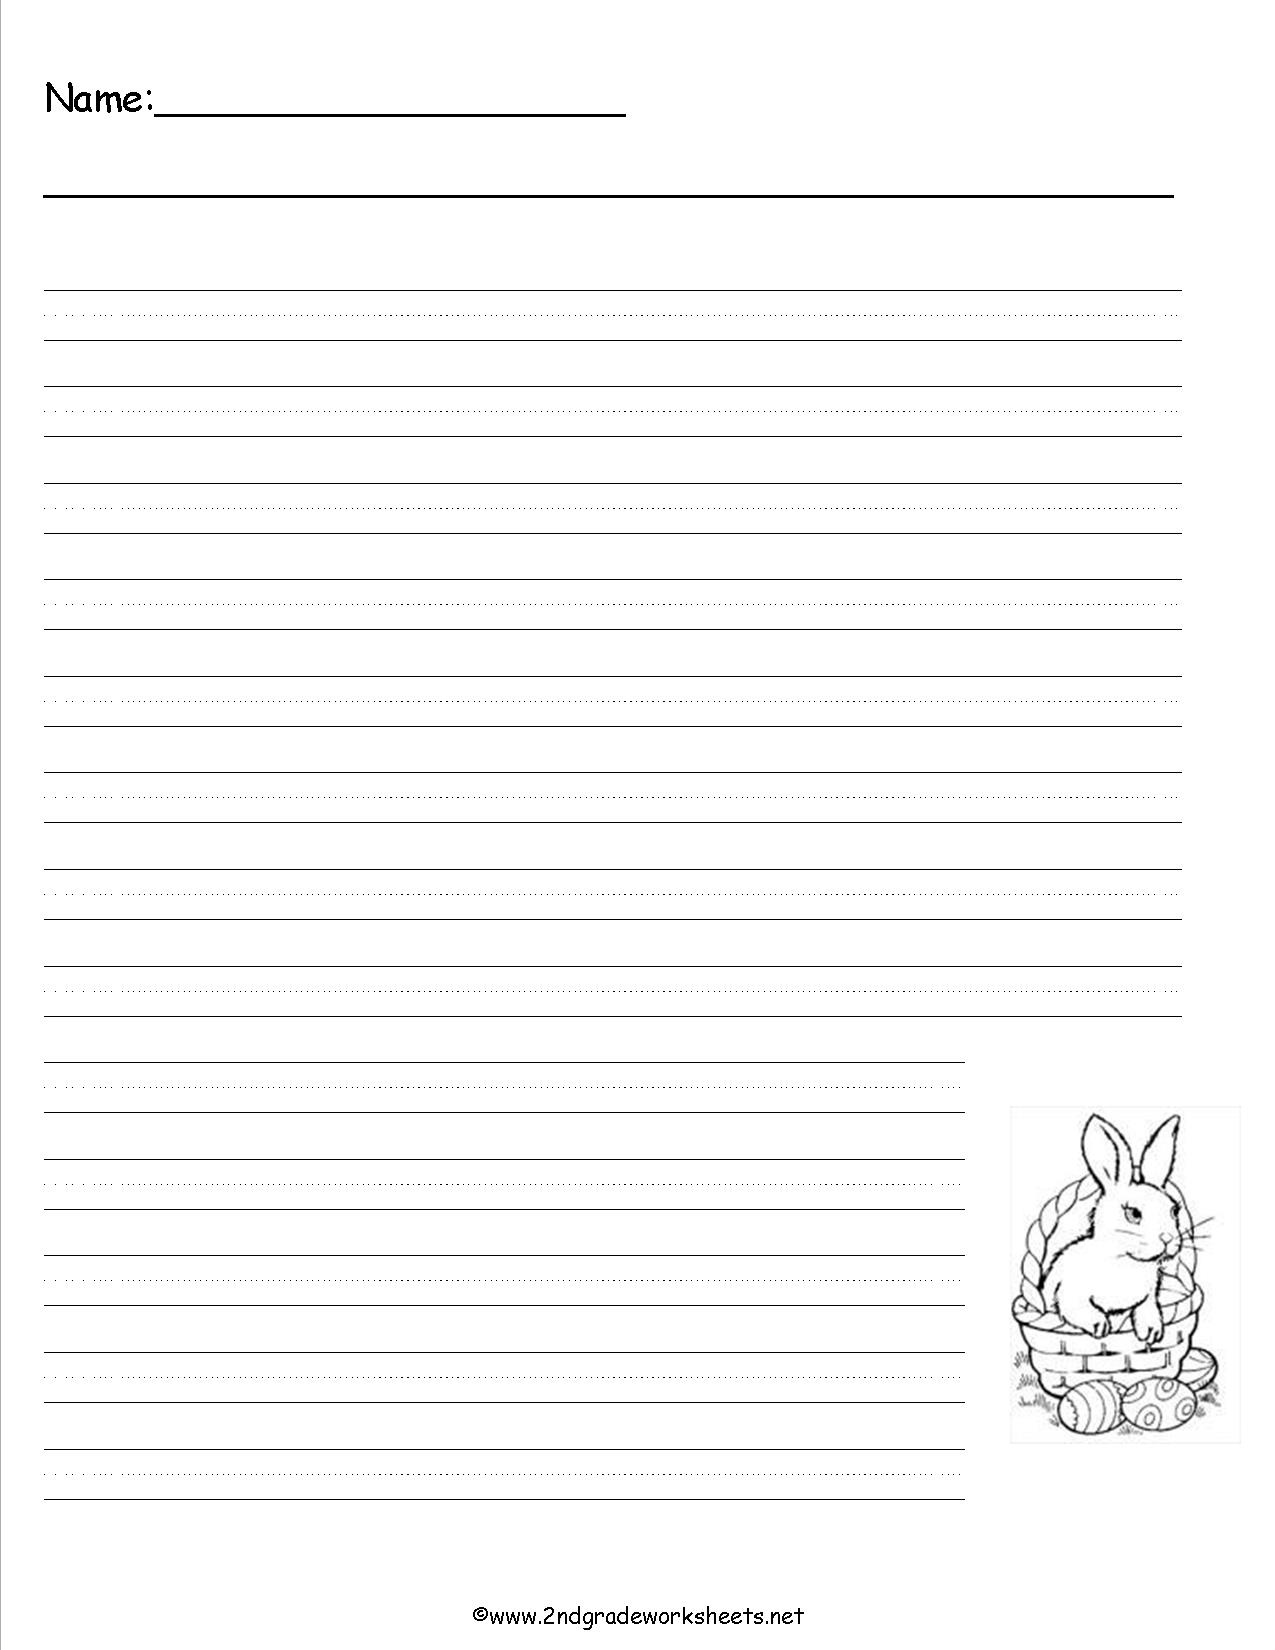 Easter Writing Paper with Lines Image